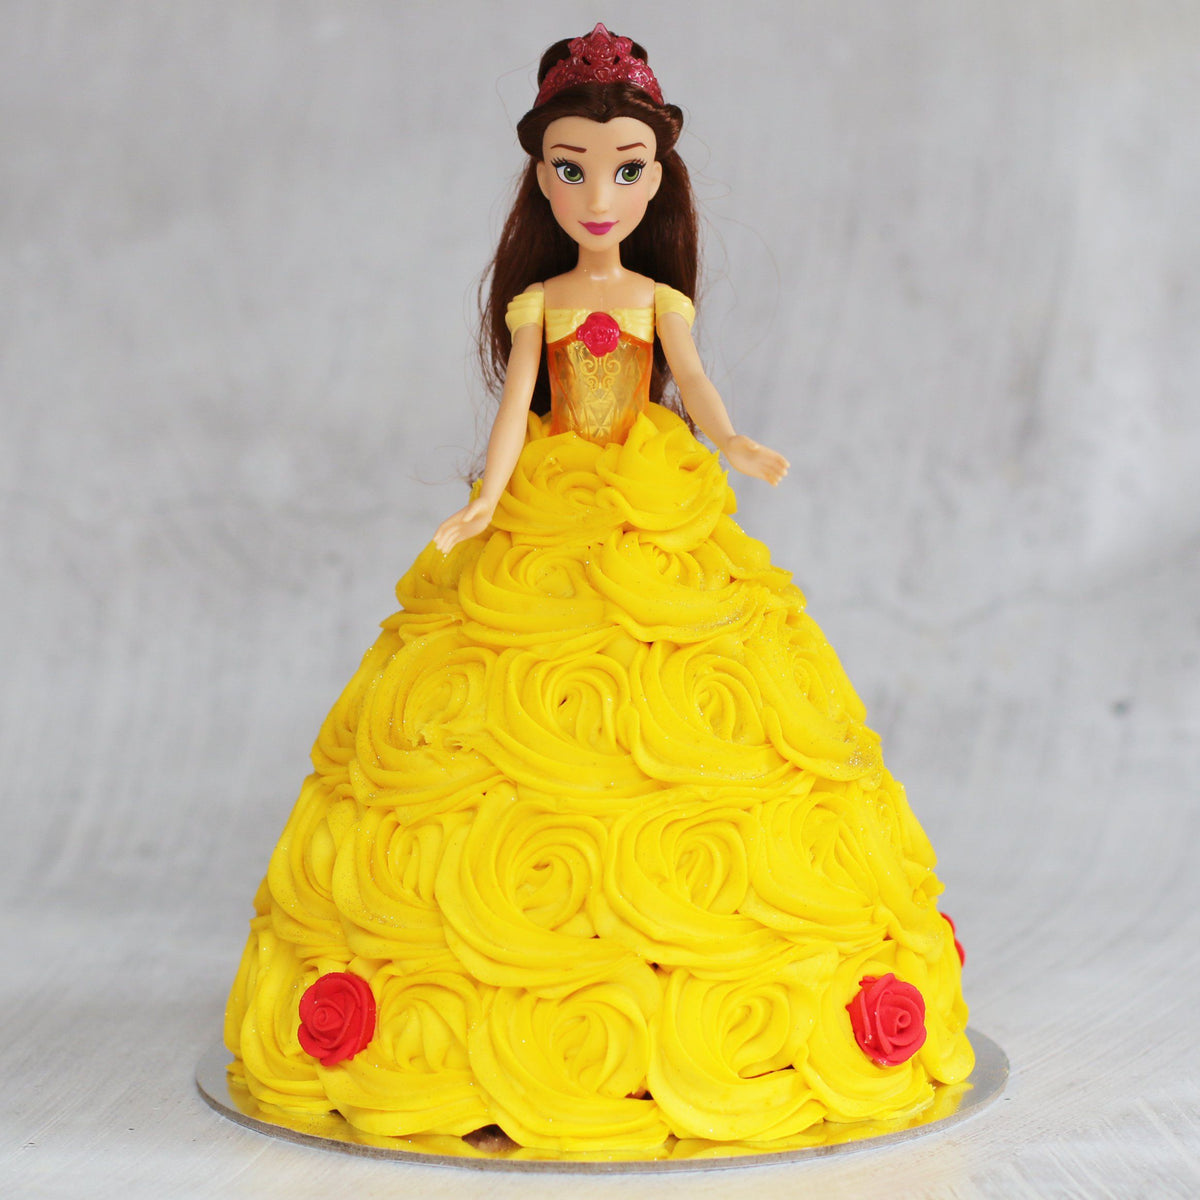 Belle Doll Cake Special Occasion The Cupcake Queens 